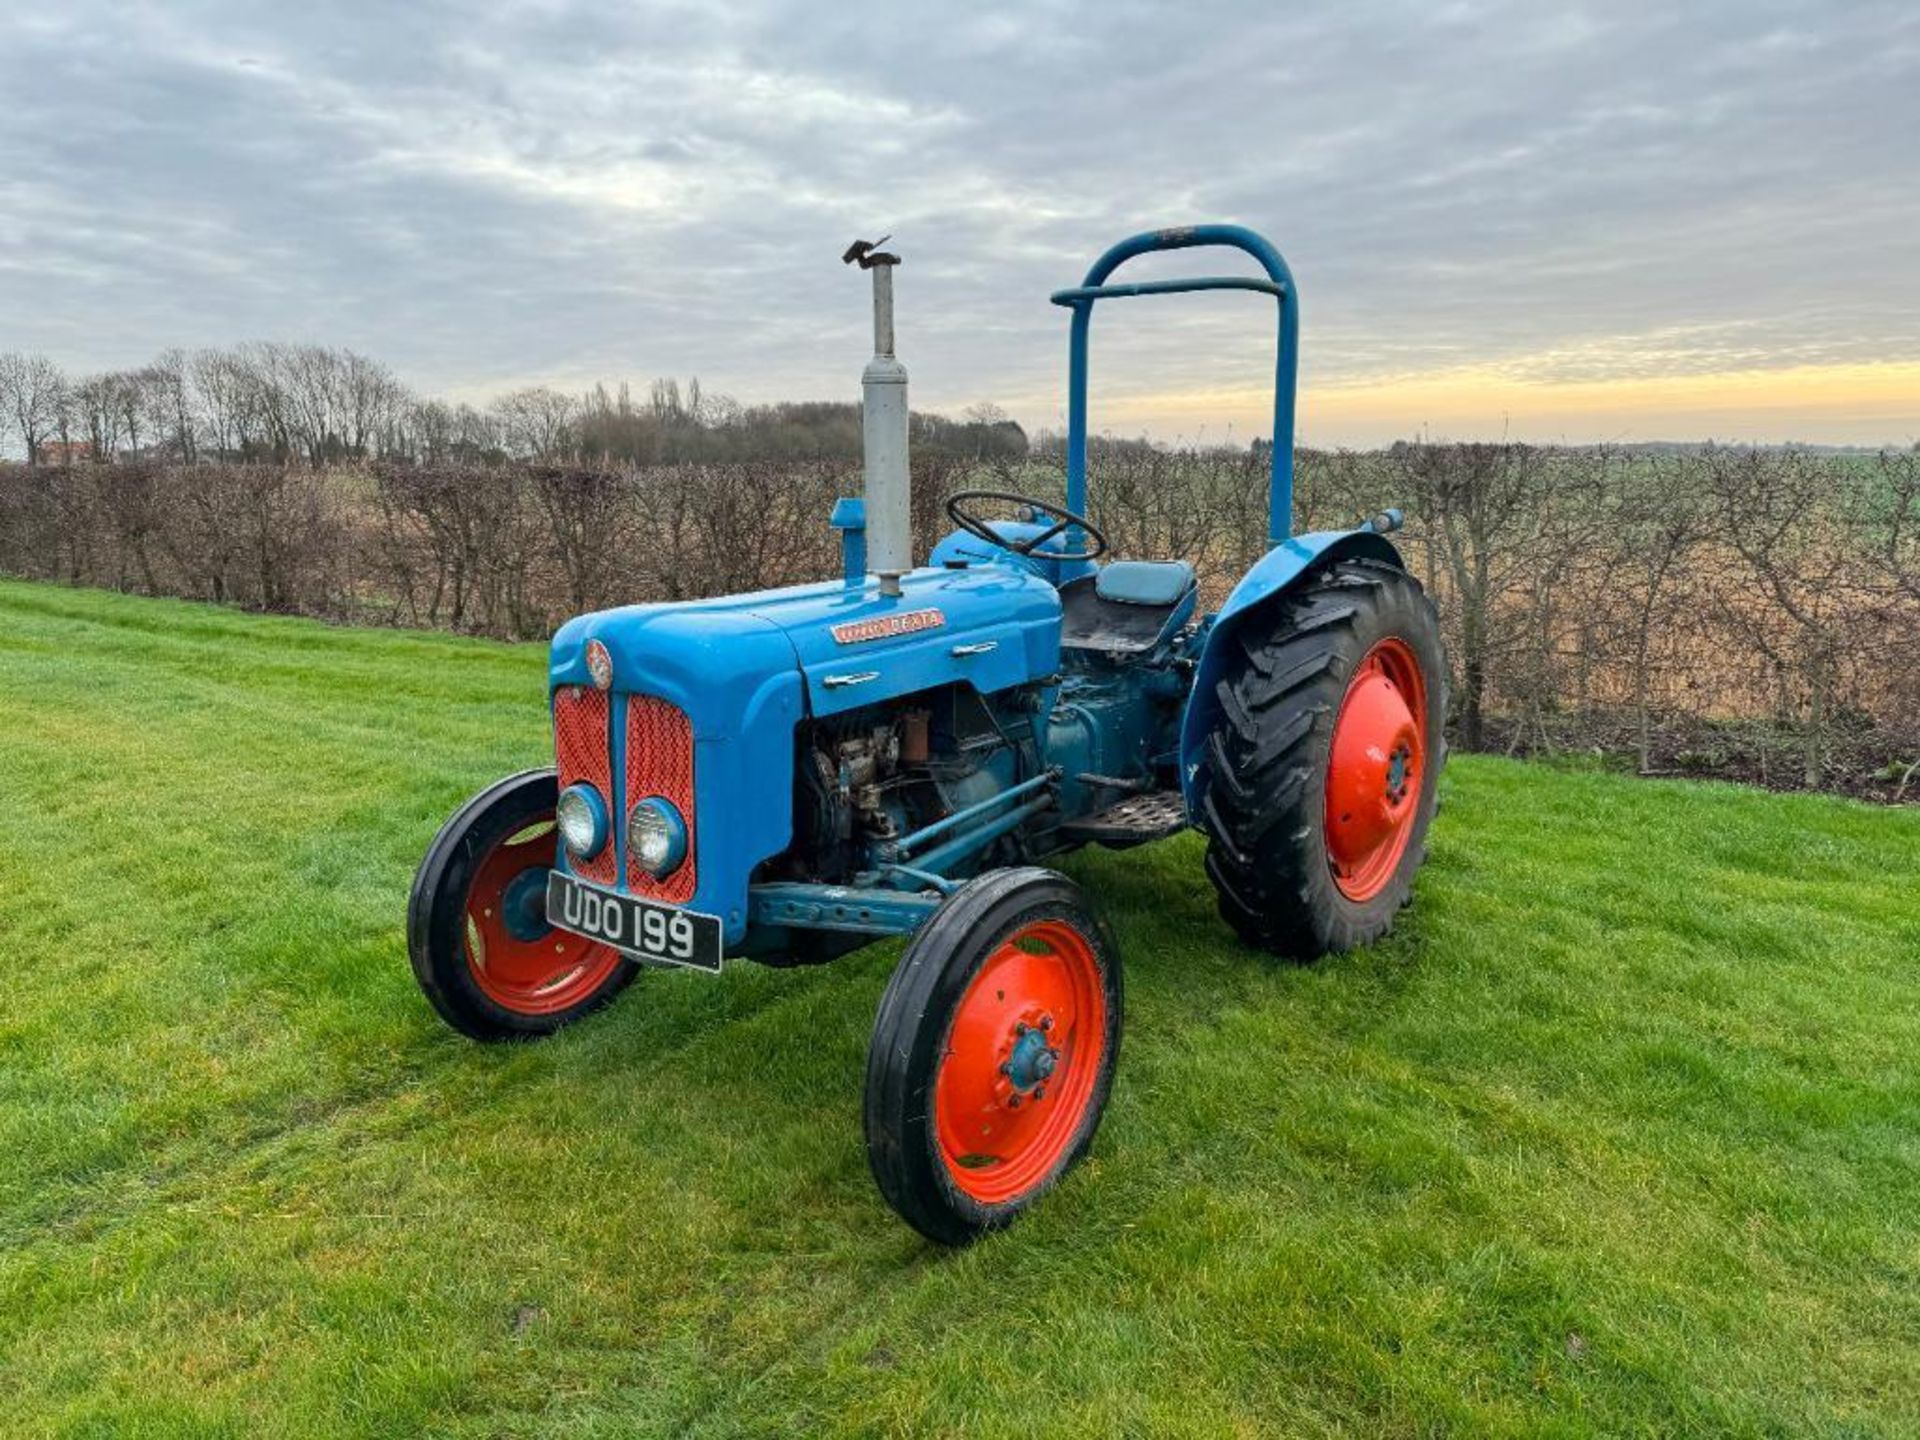 1962 Fordson Dexta 2wd diesel tractor with pick up hitch, rear linkage and rollbar on 12.4/11-28 rea - Image 3 of 14